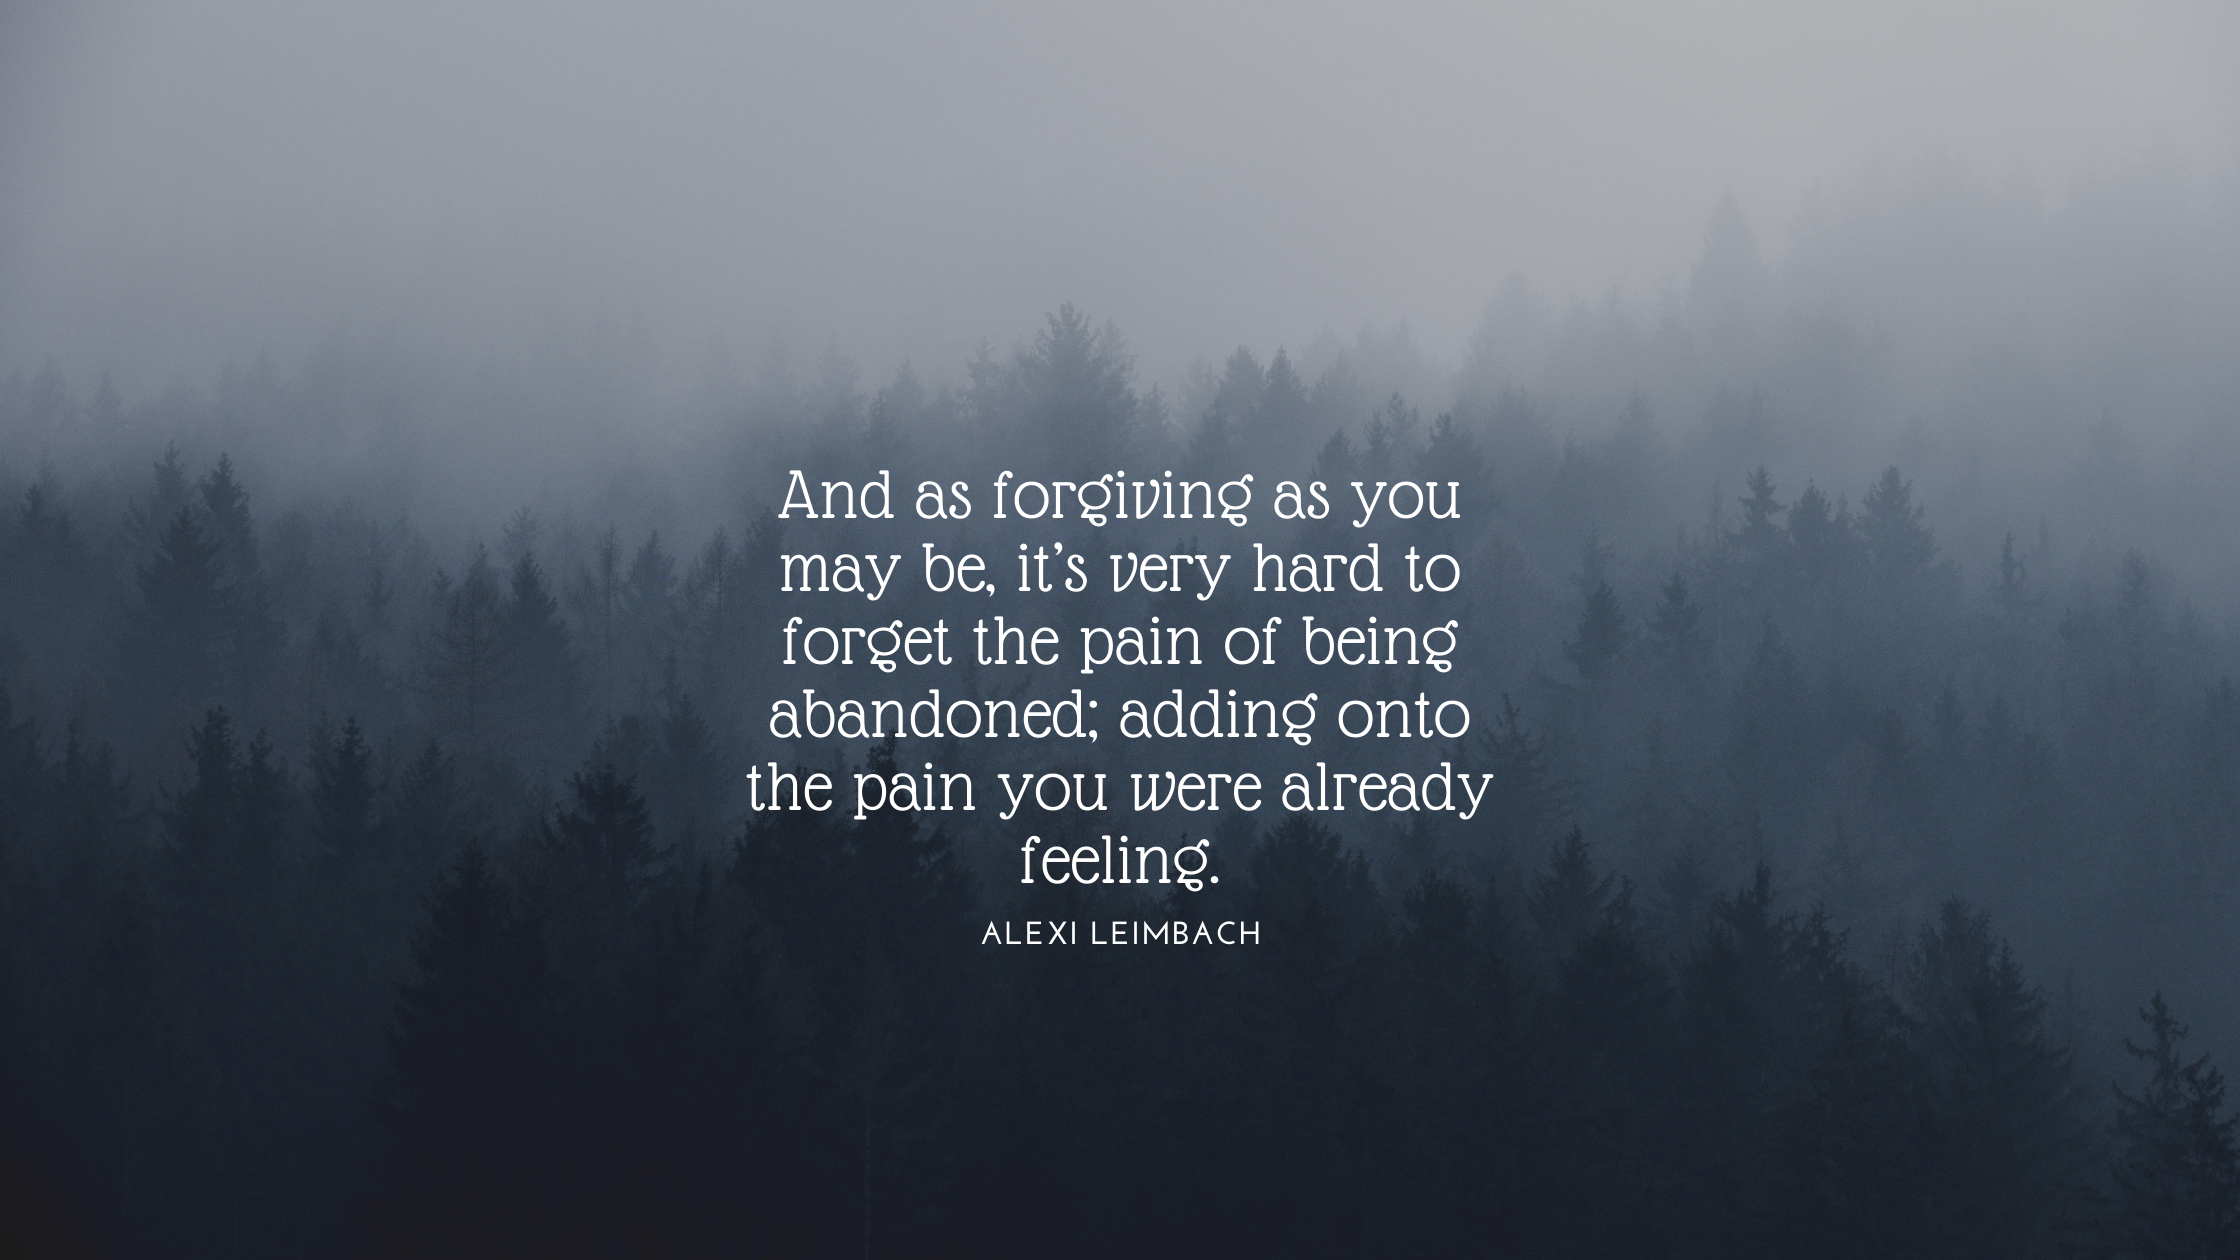 And as forgiving as you may be, it’s very hard to forget the pain of being abandoned; adding onto the pain you were already feeling.